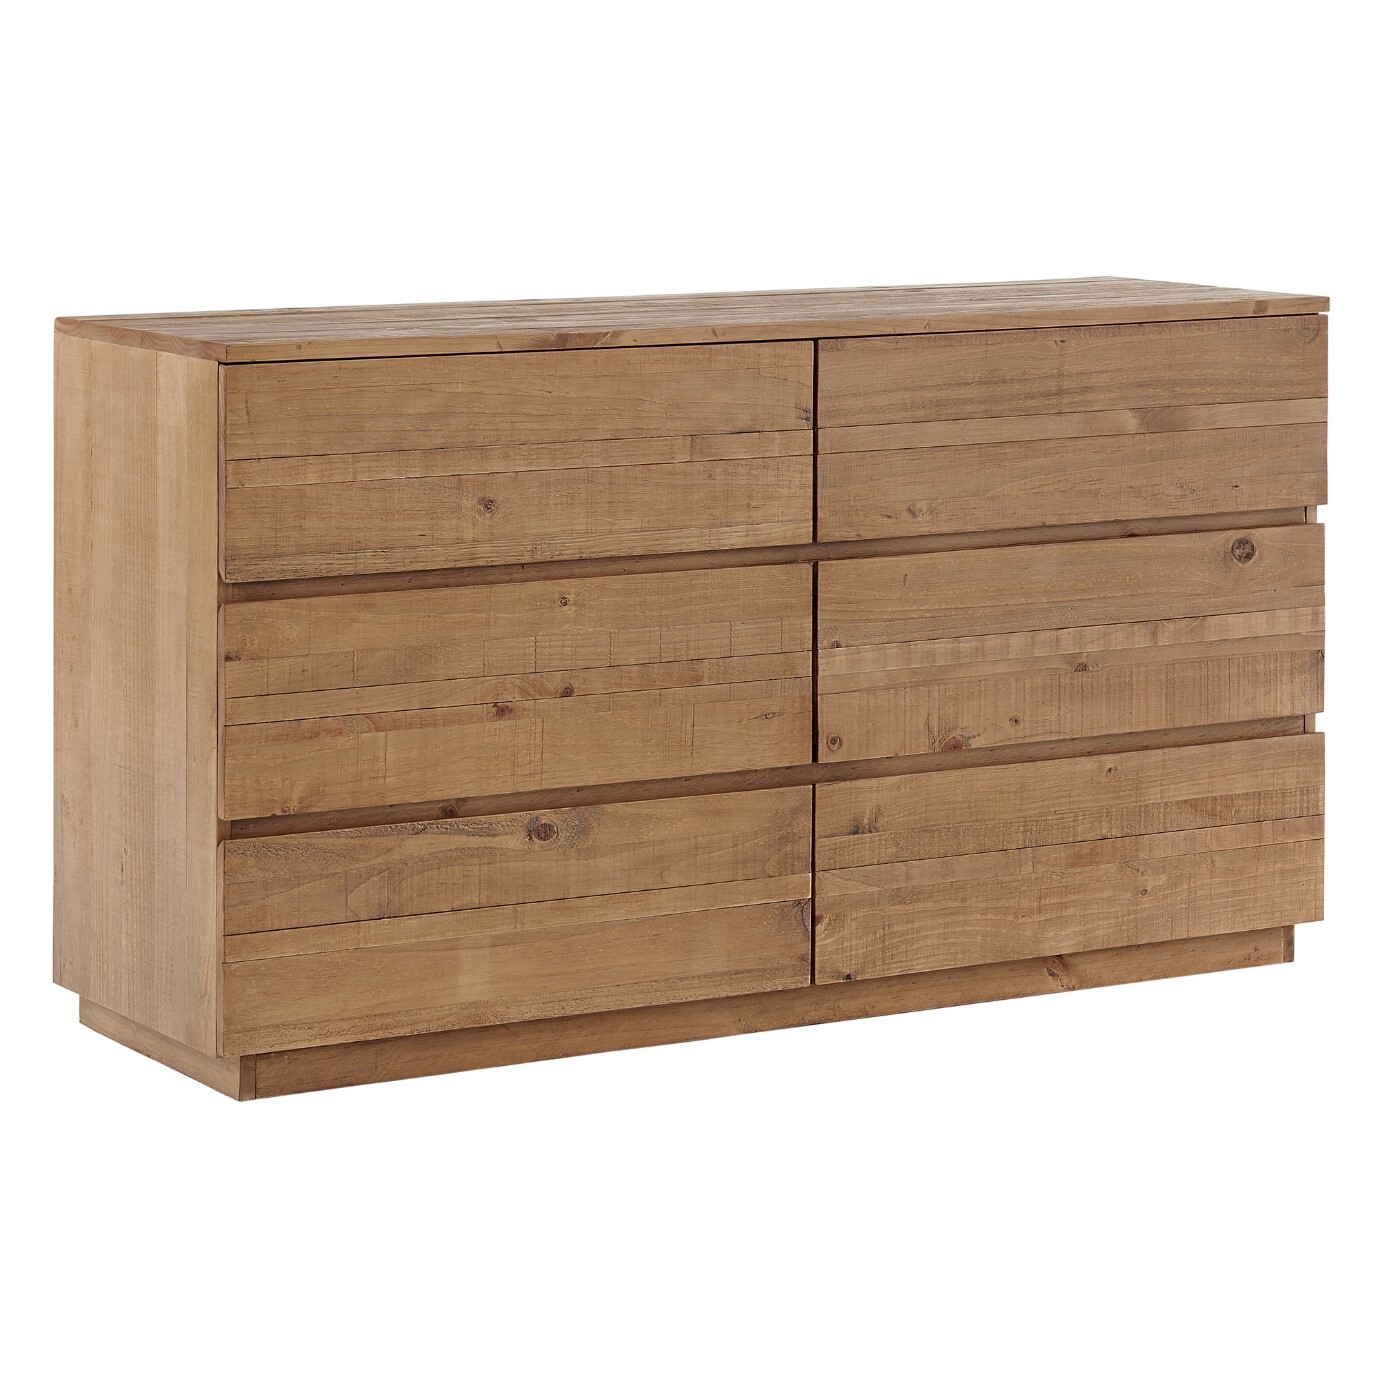 Timber Dresser Table 6 Drawer Bedroom Chest of Drawers  1450 x 450 x 800H Sorrento 4979 SDT